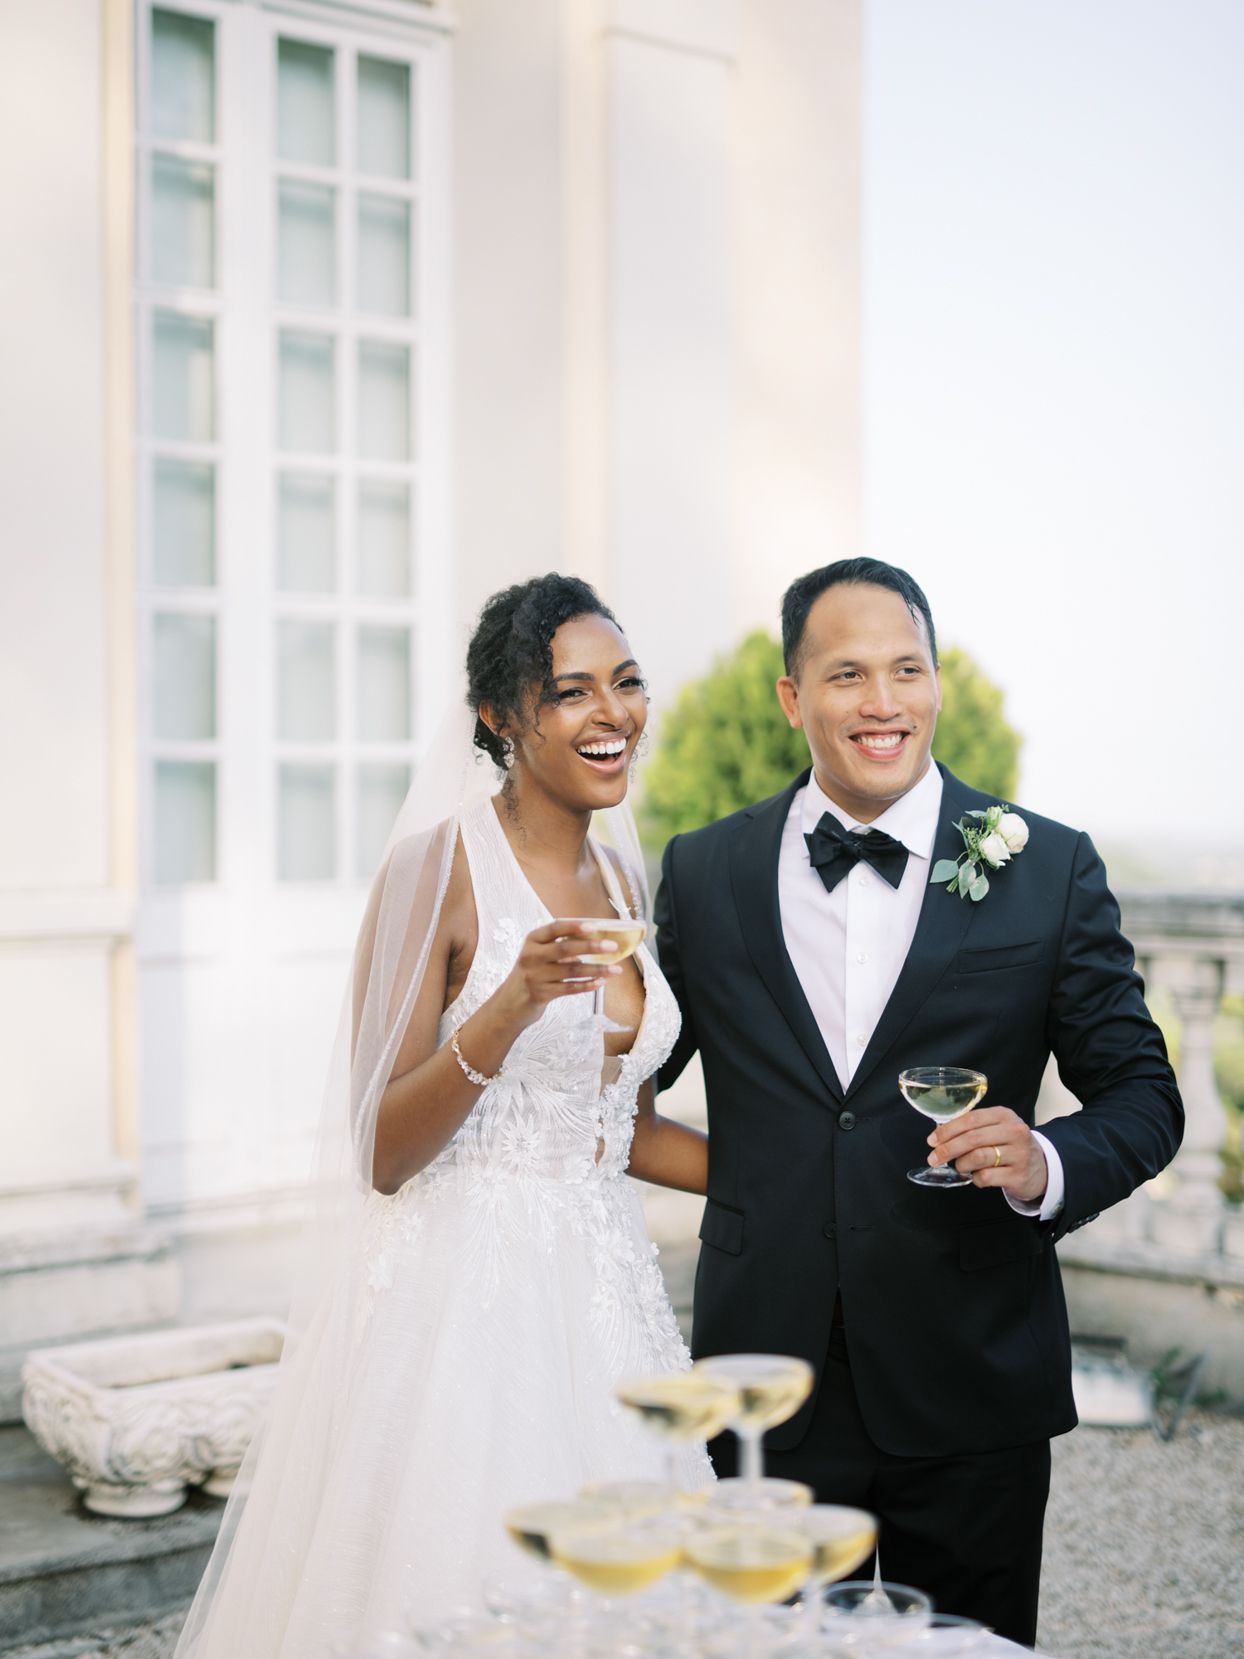 bride and groom smiling holding champagne coupe glasses